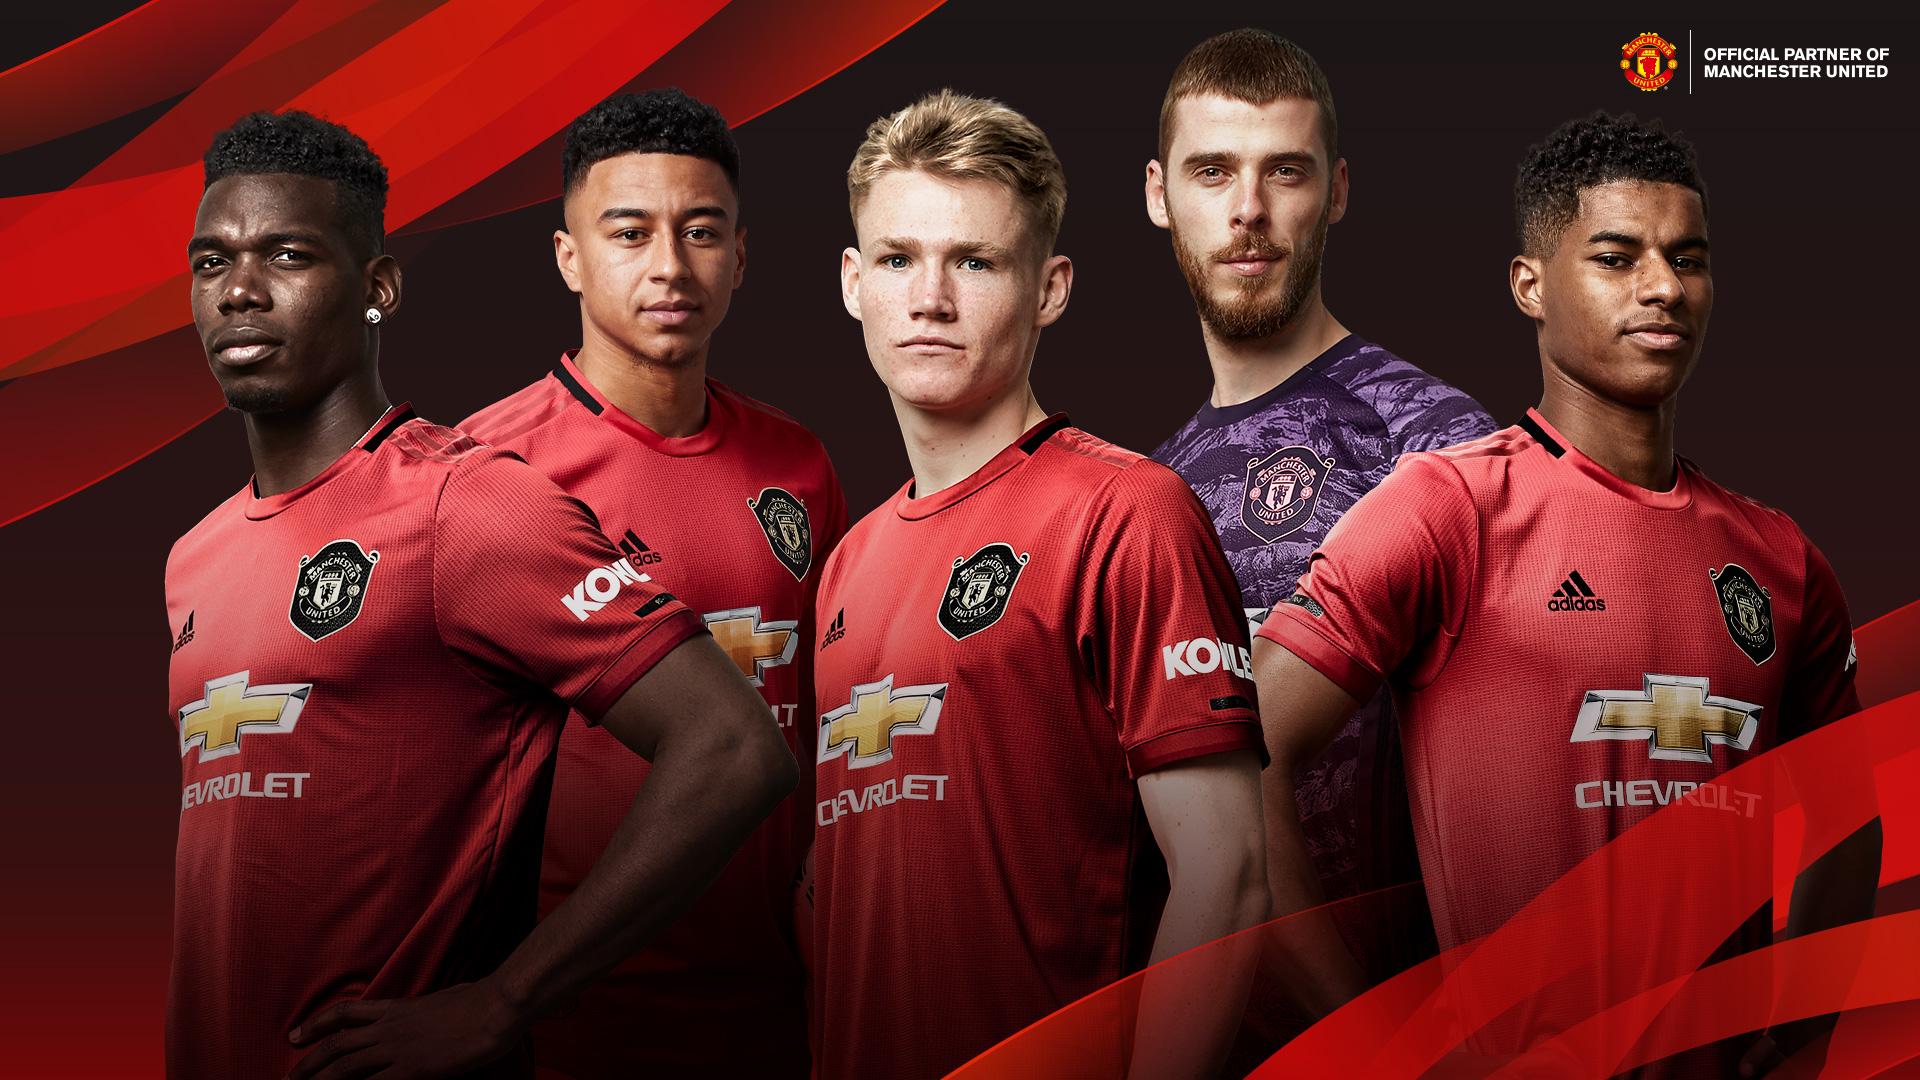 Manchester United 2021 Wallpaper Free Manchester United 2021 Background